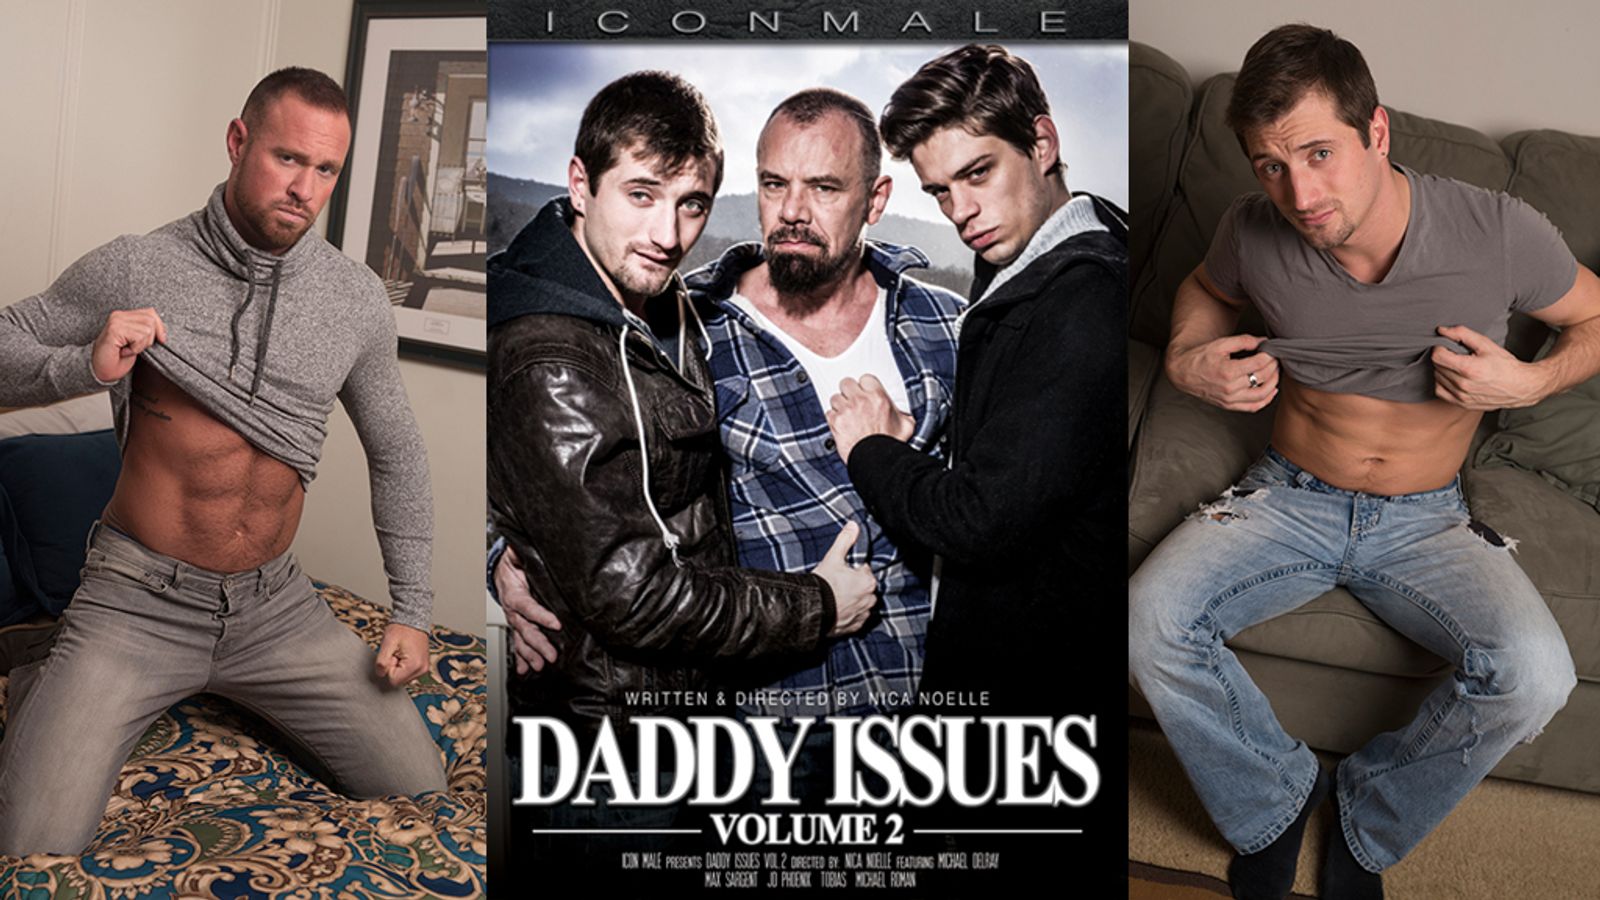 ‘Daddy Issues’ Arise Again For Icon Male In Vol. 2